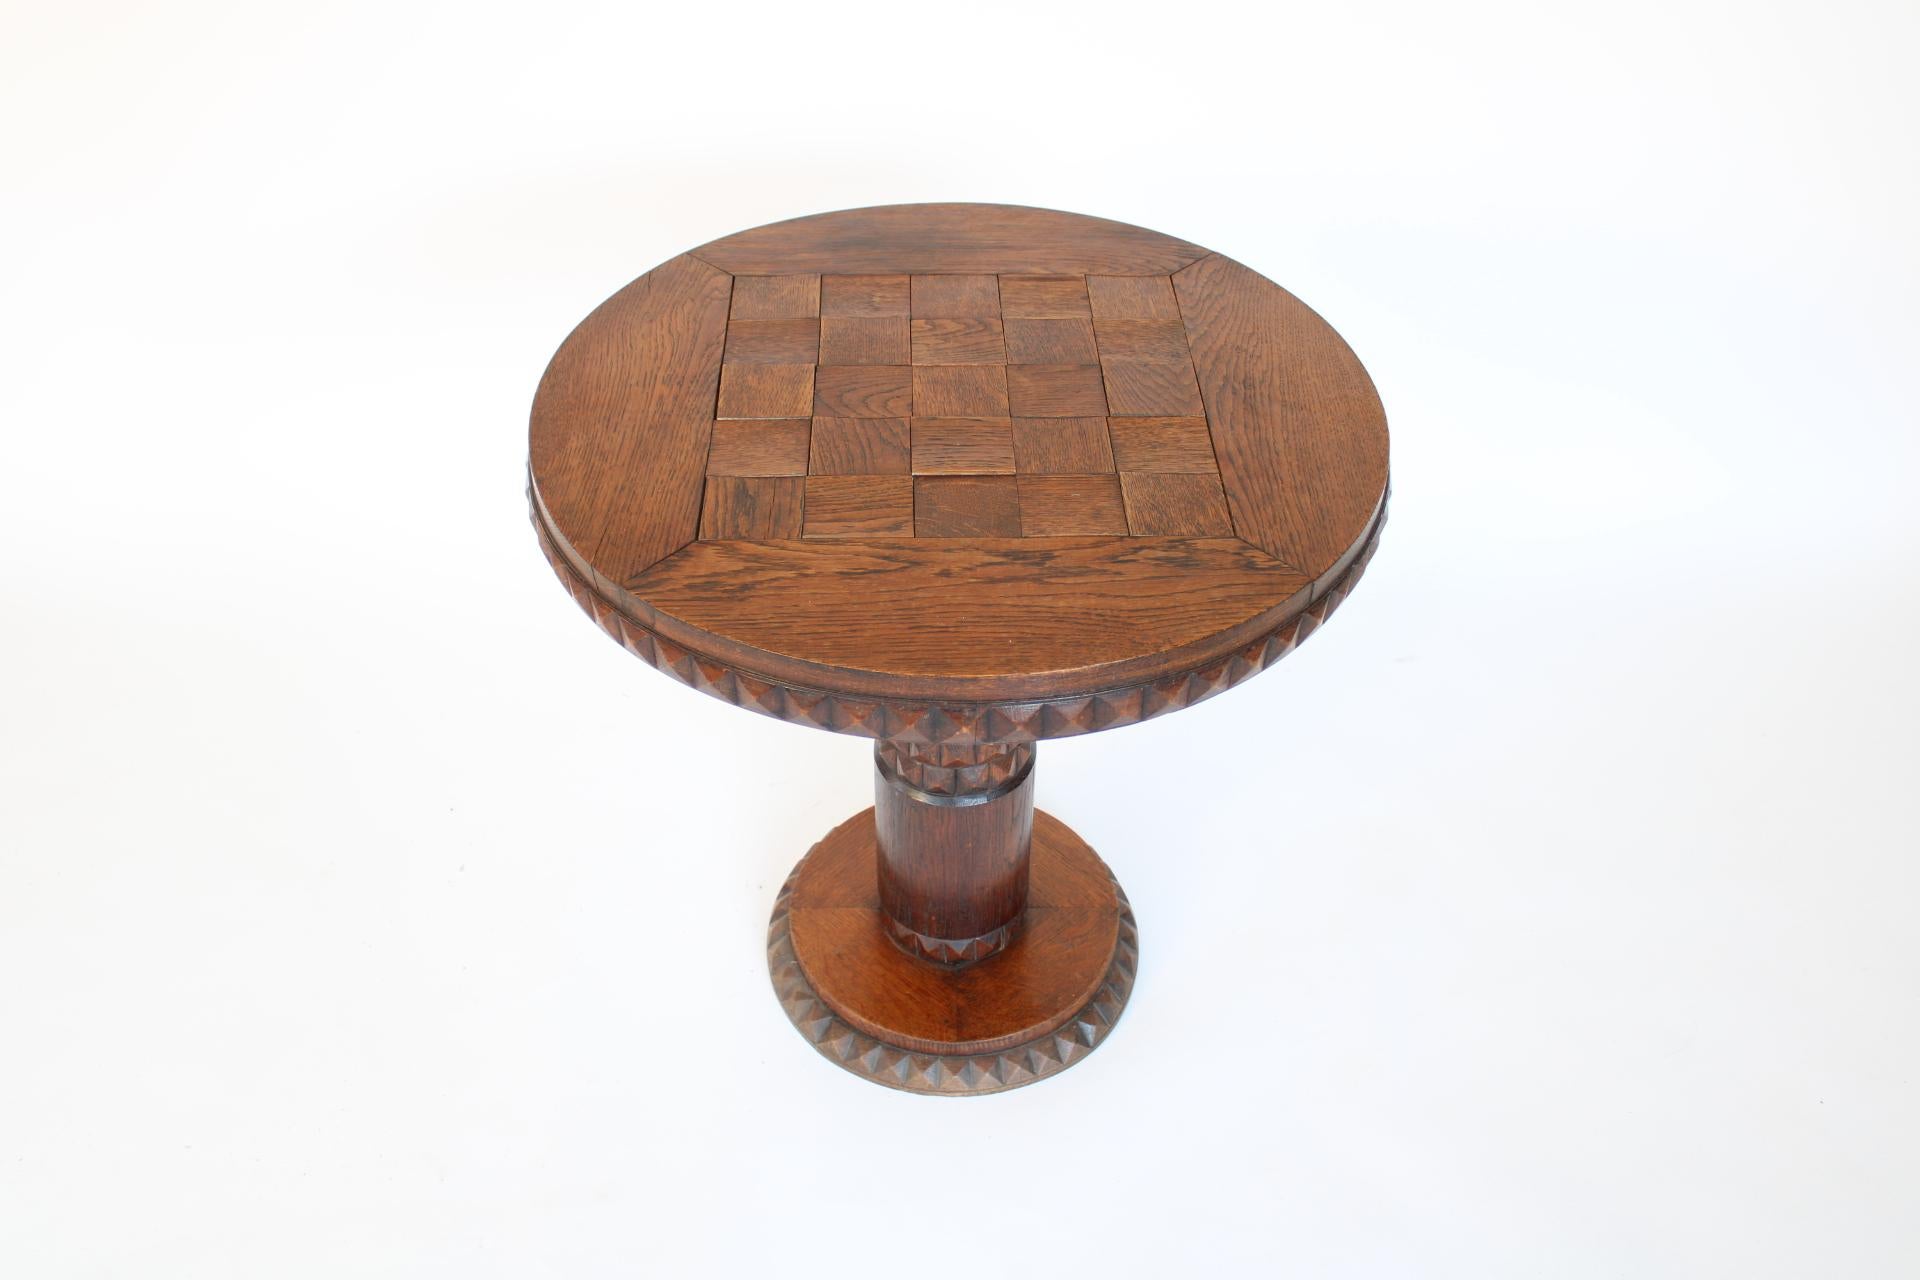 Mid-20th Century French Oak Side Carved Table Art Deco Africanist Influence Attributed to Dudouyt For Sale